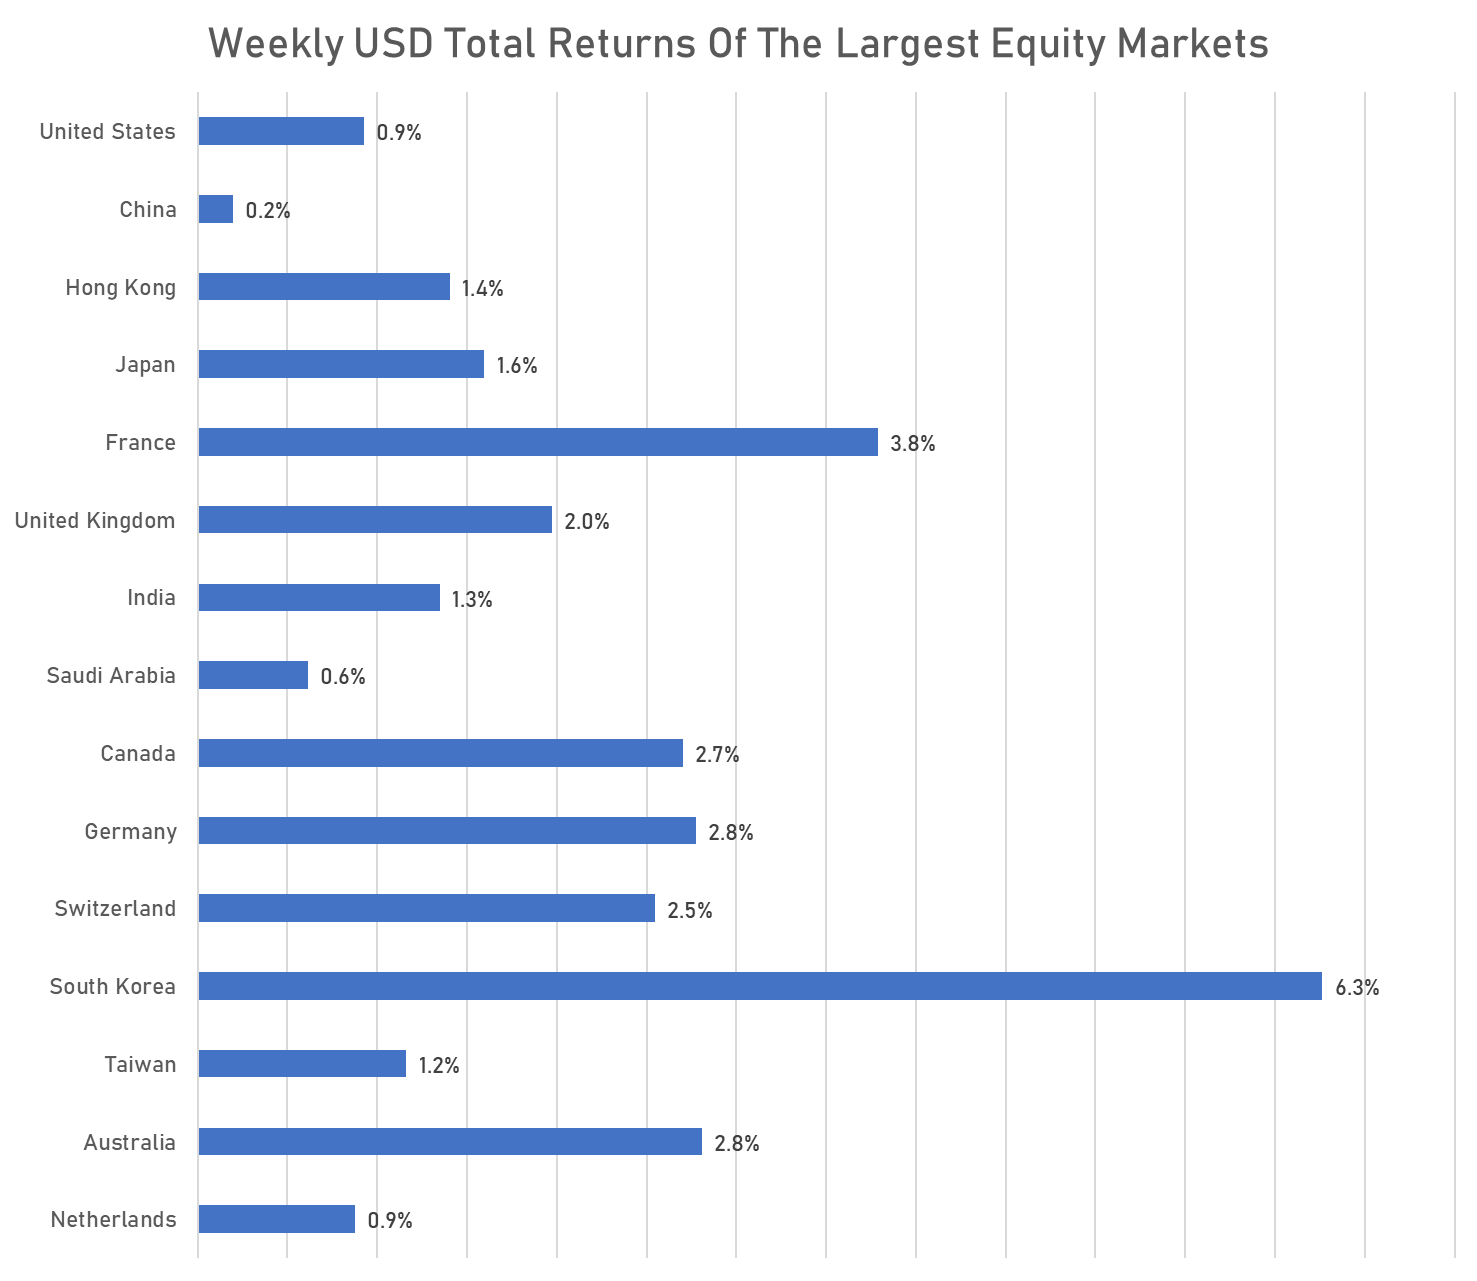 Weekly USD Total returns of the largest equity markets | Sources: phipost.com, FactSet data